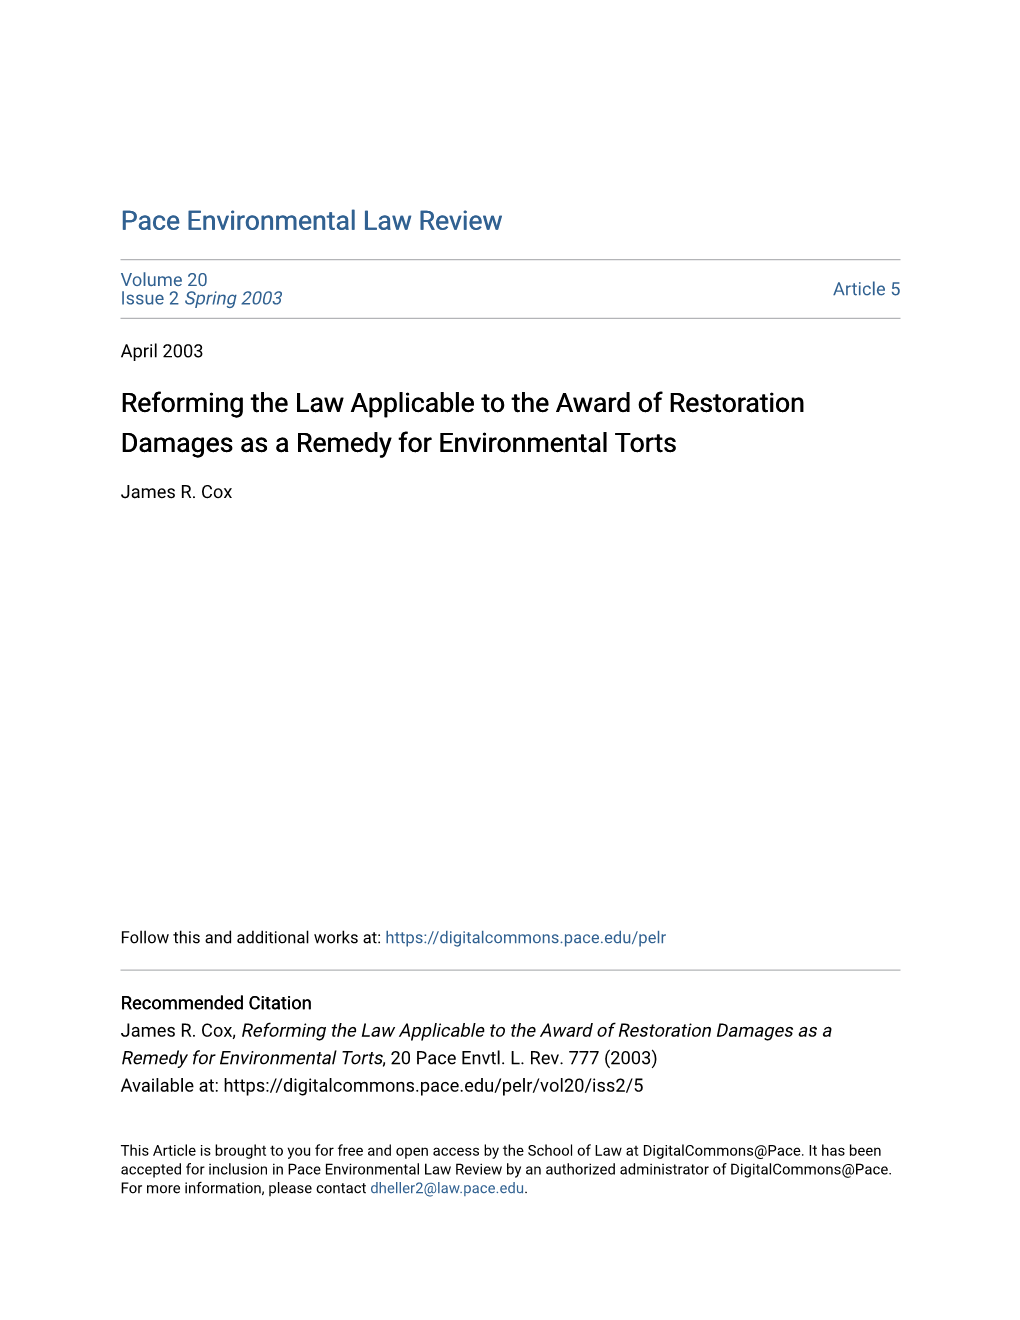 Reforming the Law Applicable to the Award of Restoration Damages As a Remedy for Environmental Torts